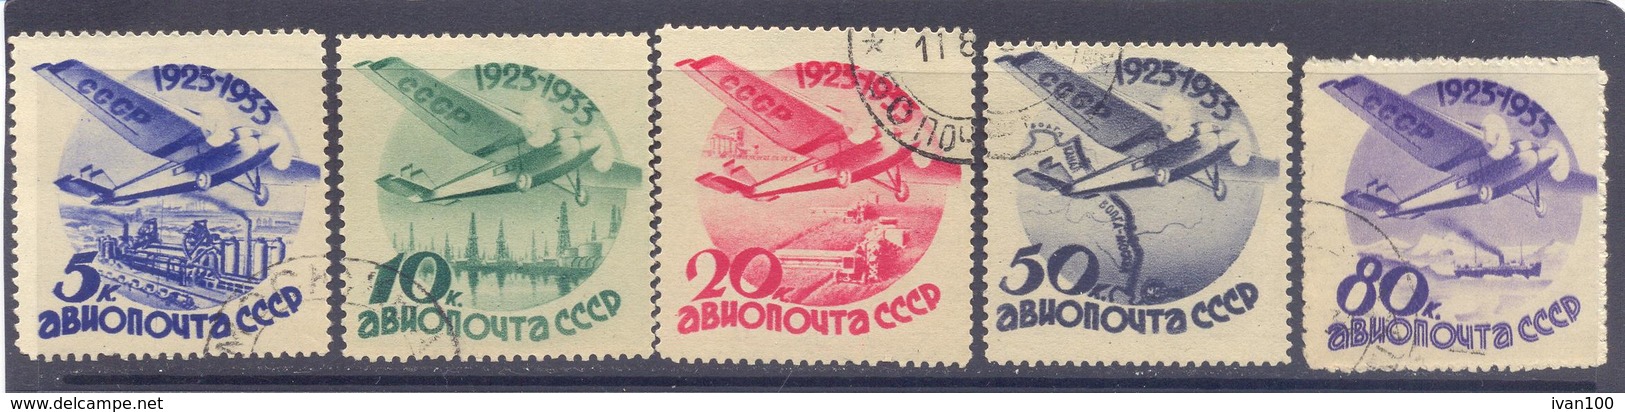 1934. USSR/Russia, 10th Anniv. Of Soviet Civil Aviation And USSR Air-mail Service, Mich.462/66v, Used - Gebraucht